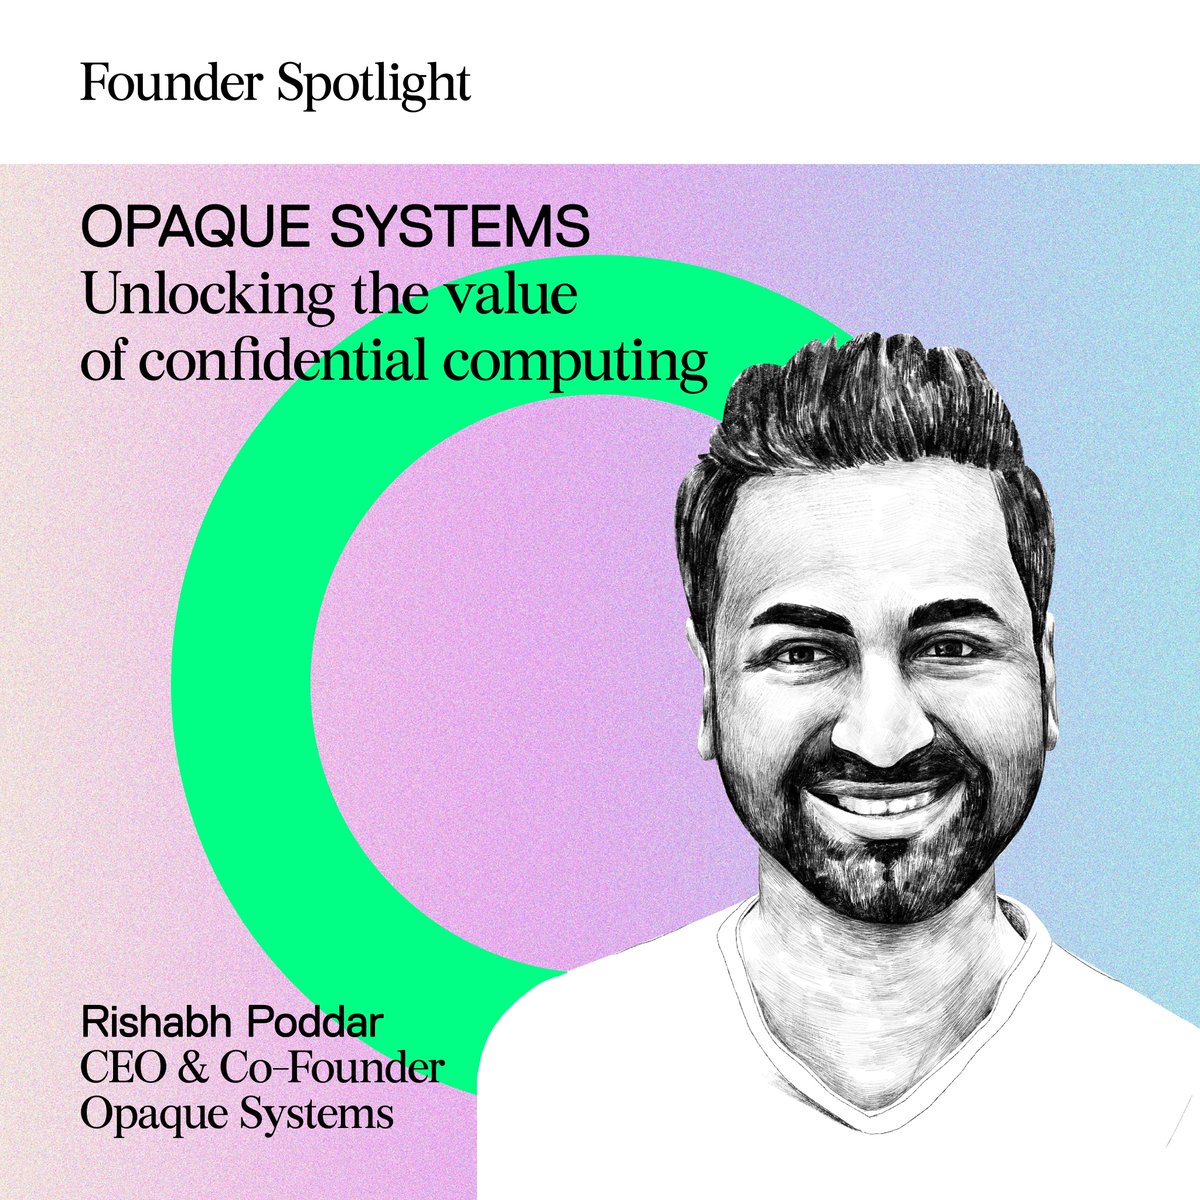 Although still in its early stages, the potential of #confidentialcomputing is tremendous.“We’re enabling outcomes that have never been possible before,” says @opaquesys cofounder @Podcastinator. Read the full story here: bit.ly/3Ai0rPa